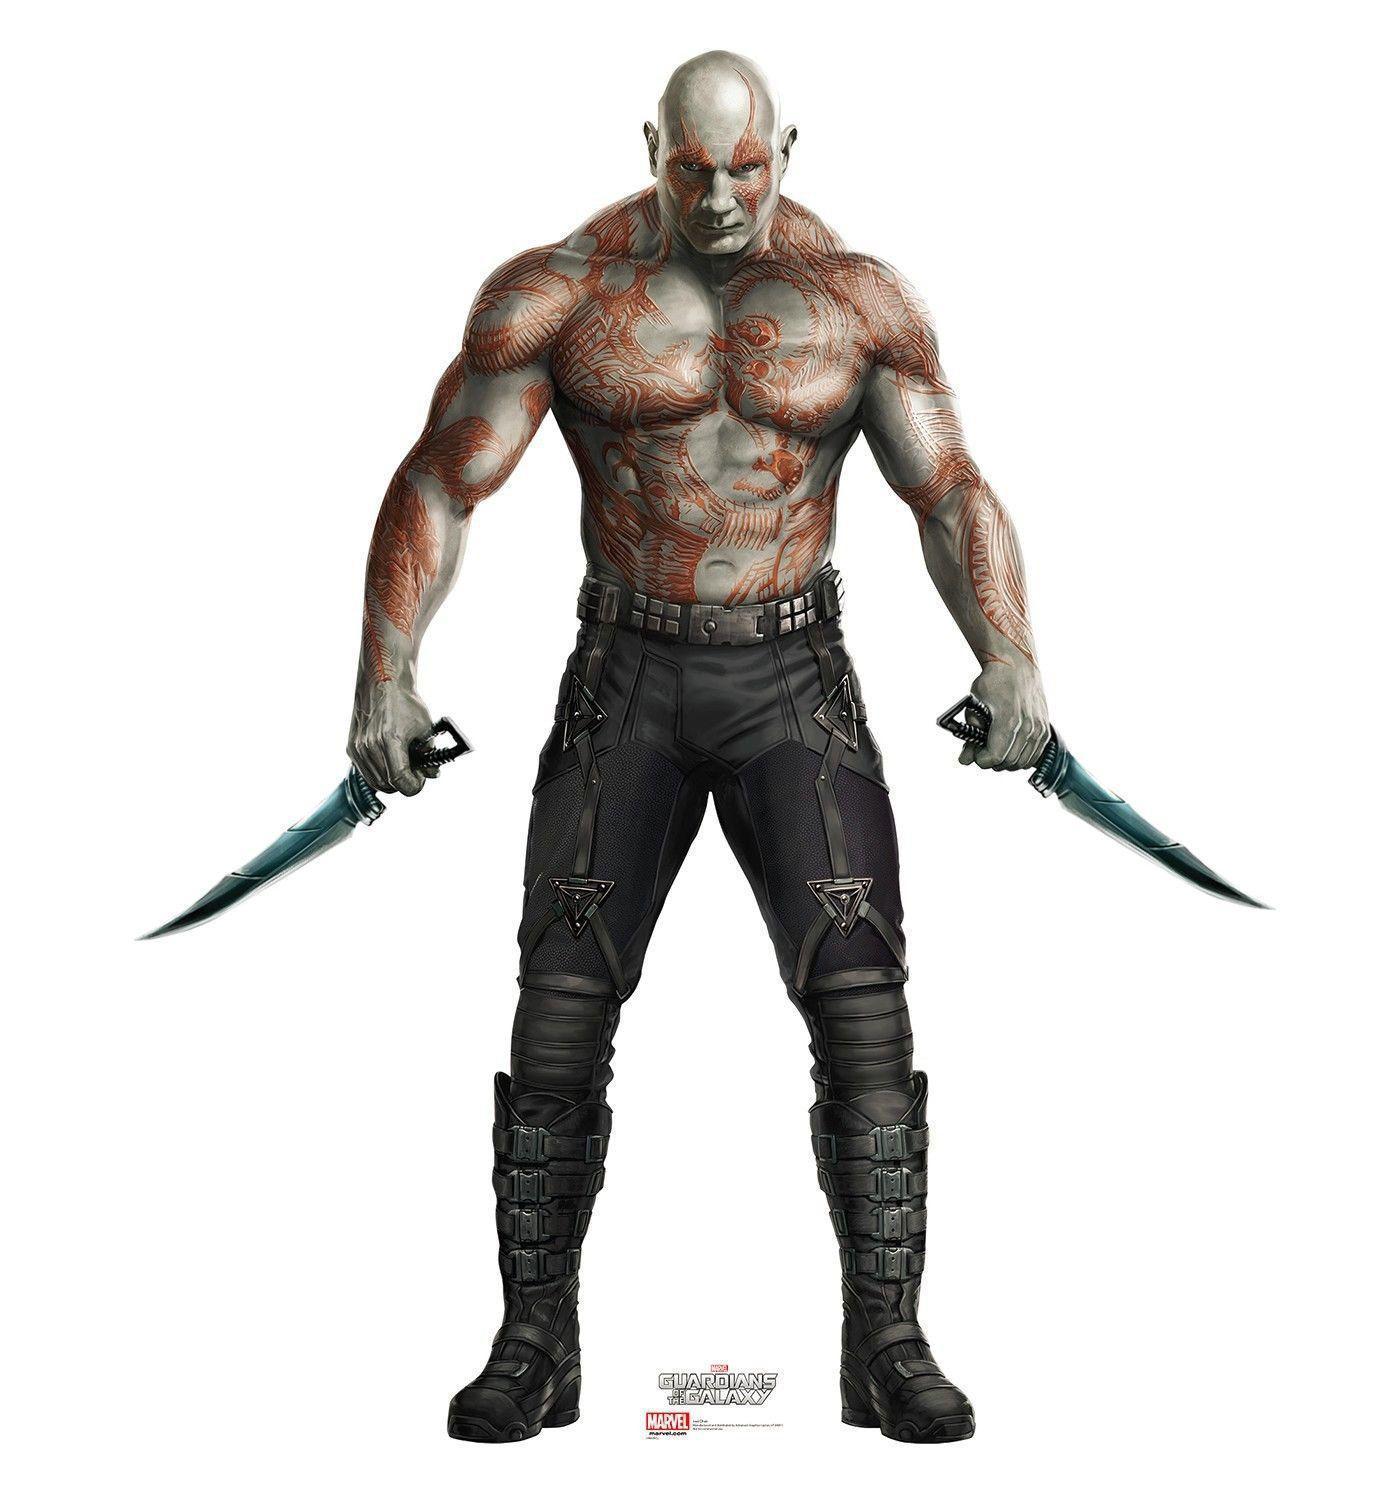 1400x1494px 176.29 KB Drax The Destroyer